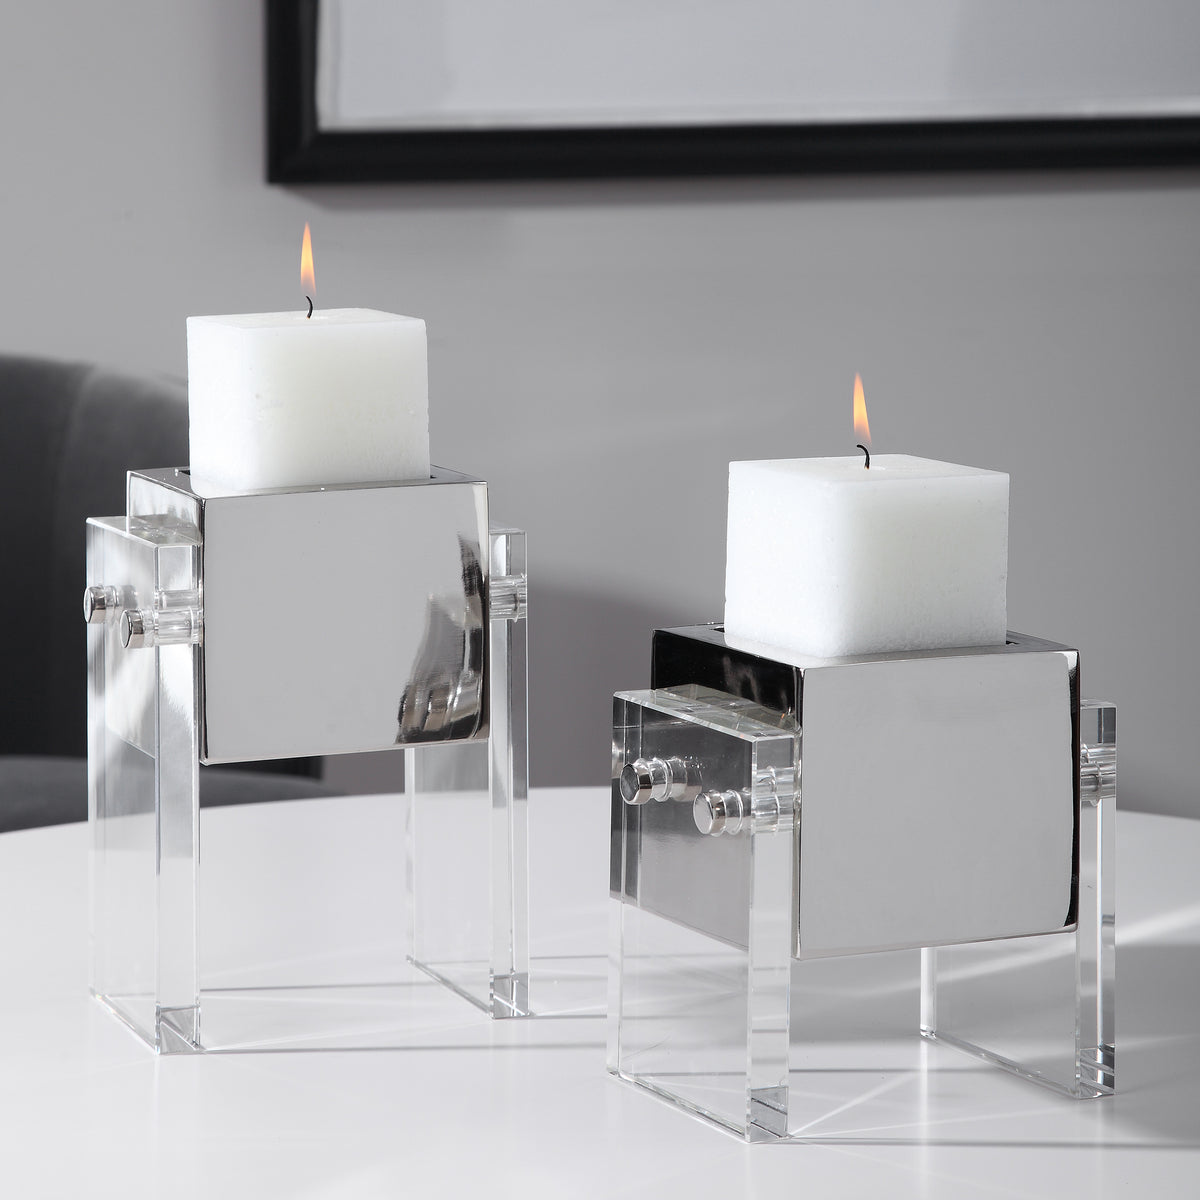 Uttermost Sutton Square Candleholders, S/2